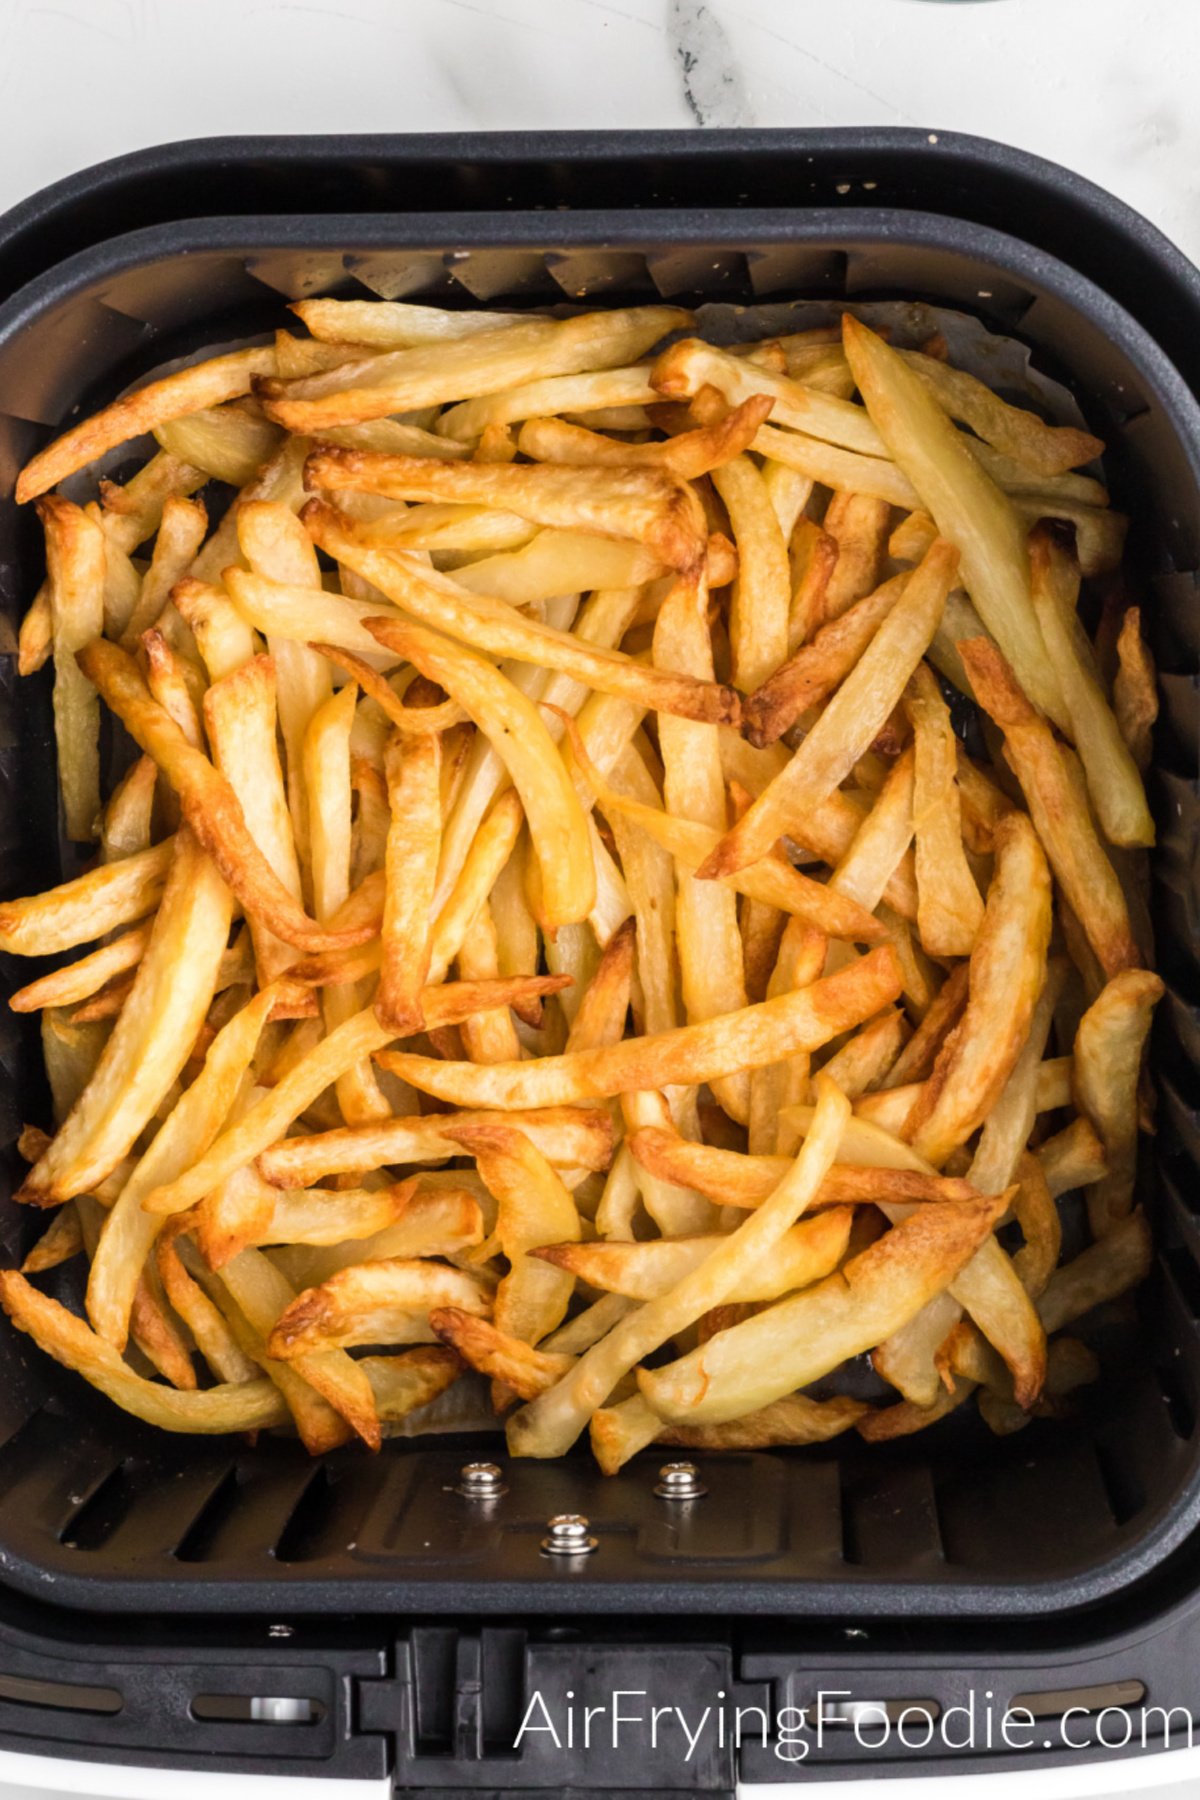 Reheated fries in the basket of the air fryer.